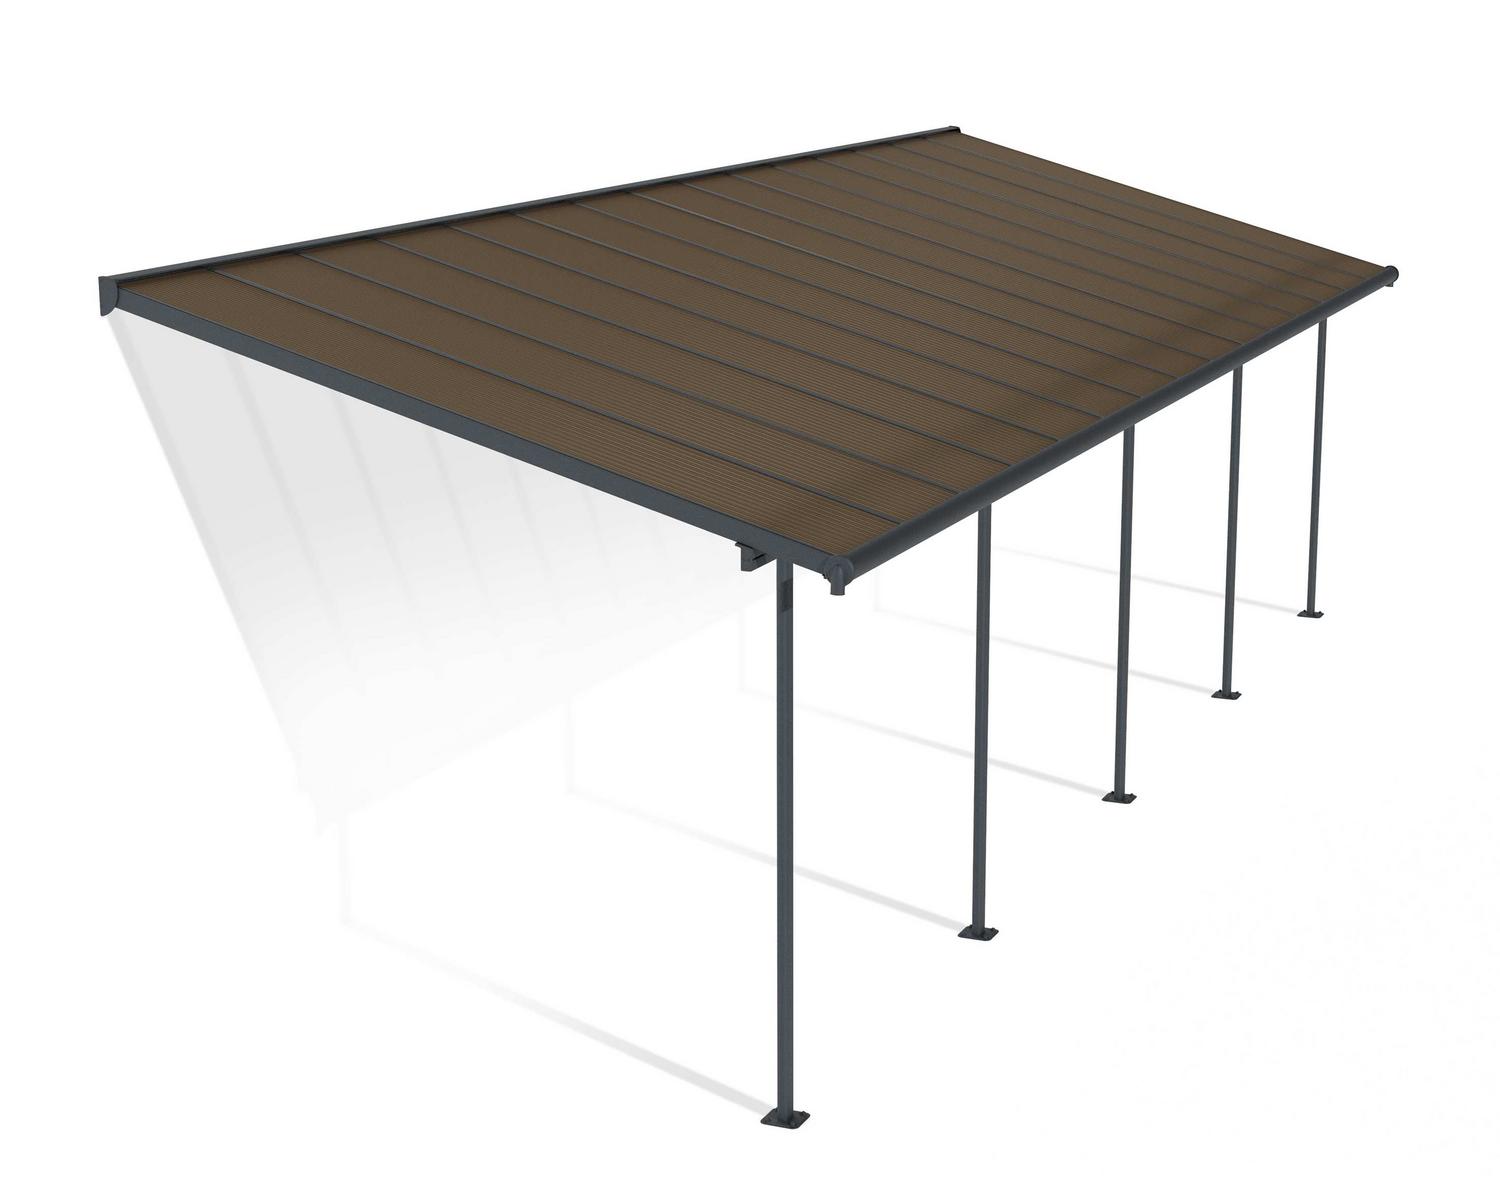 Capri 10 ft. x 30 ft. Grey Aluminium Patio Cover With 5 Posts, Bronze-Tinted Twin-wall Polycarbonate Roof Panels.